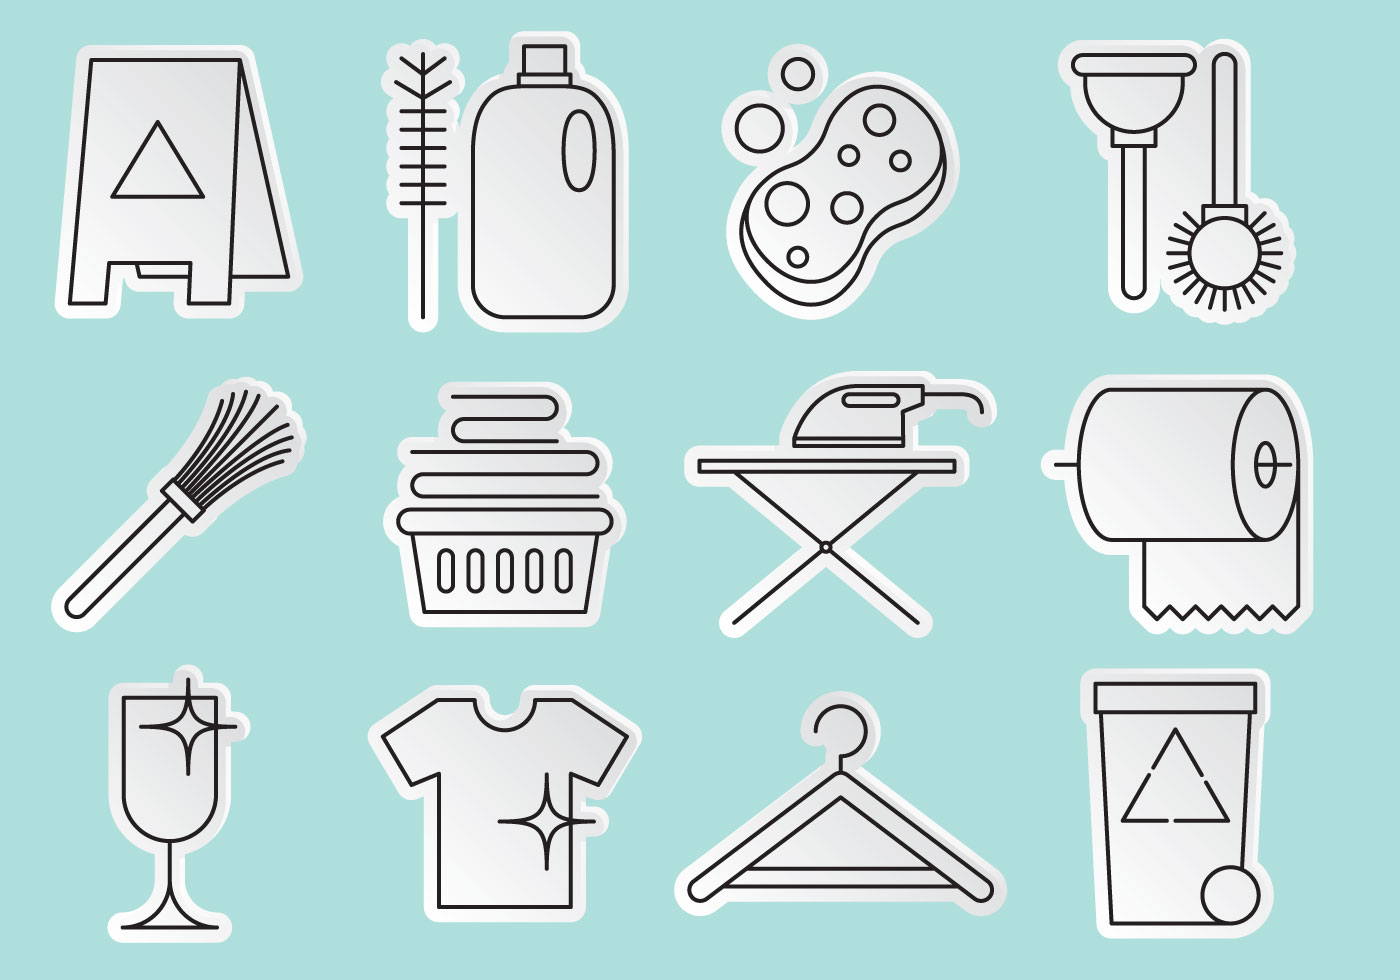 cleaning vector icons